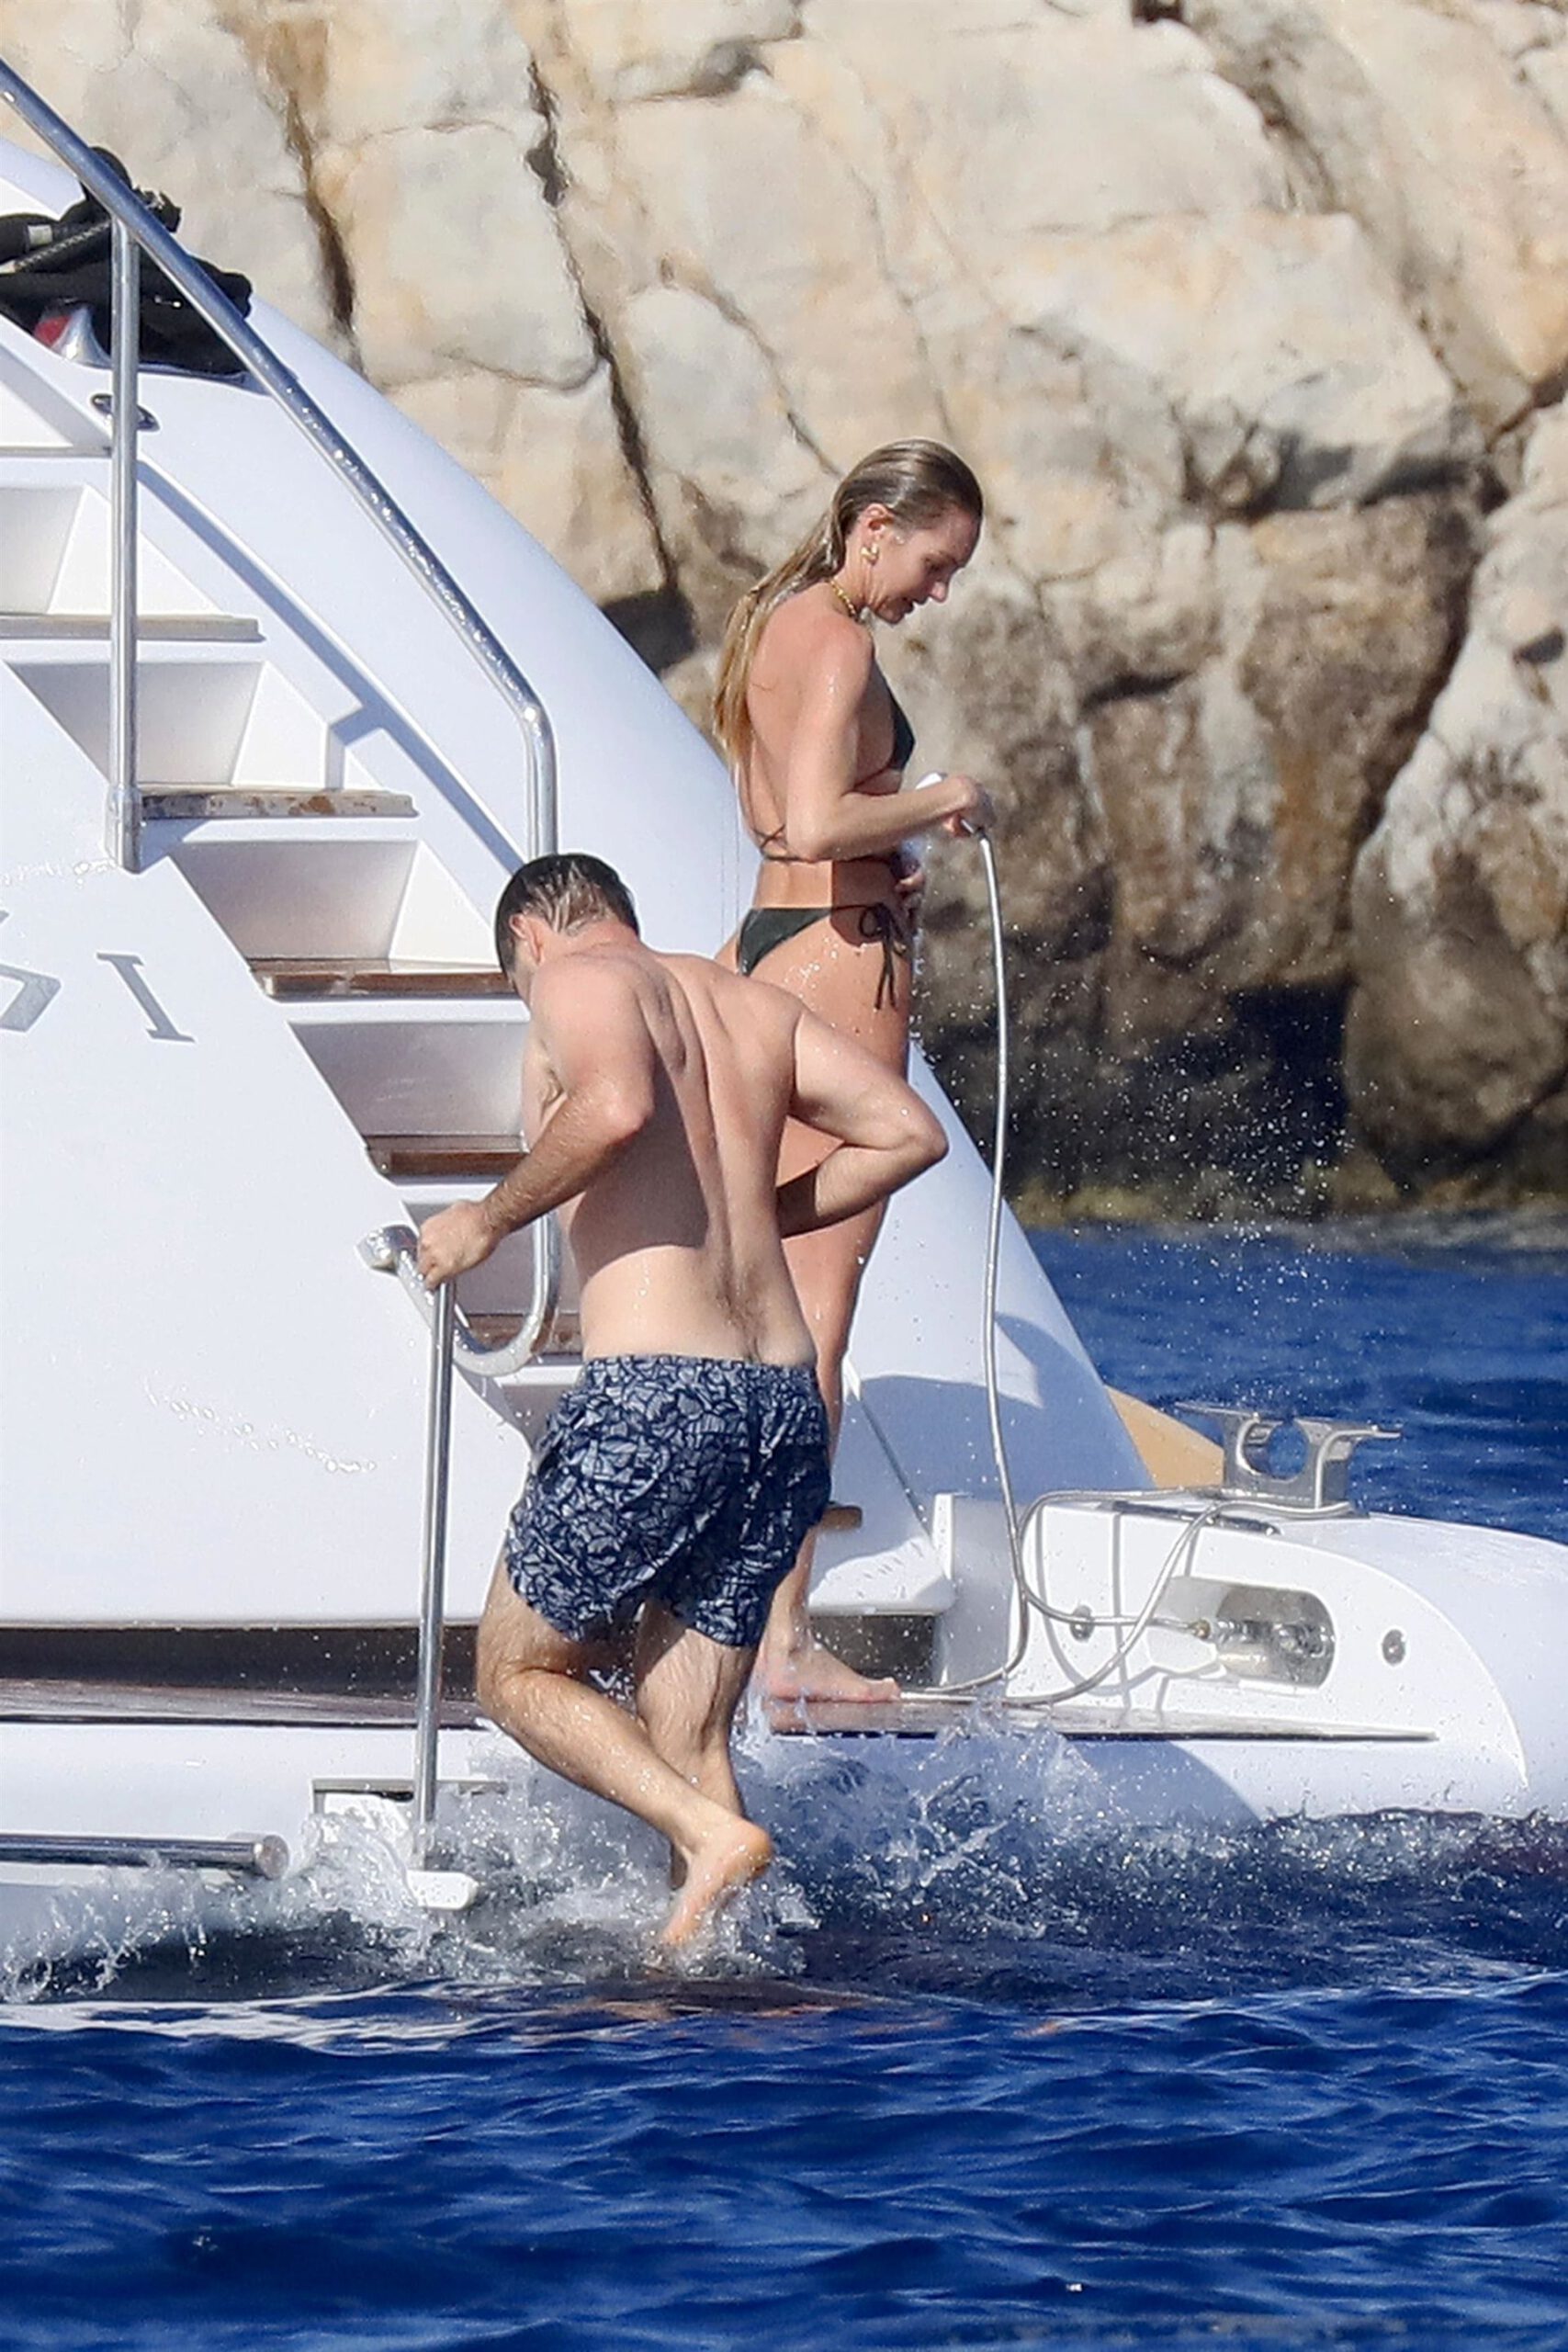 Candice Swanepoel Shows Off Her Amazing Figure in a Thong Bikini on a Yacht in the French Riviera pics